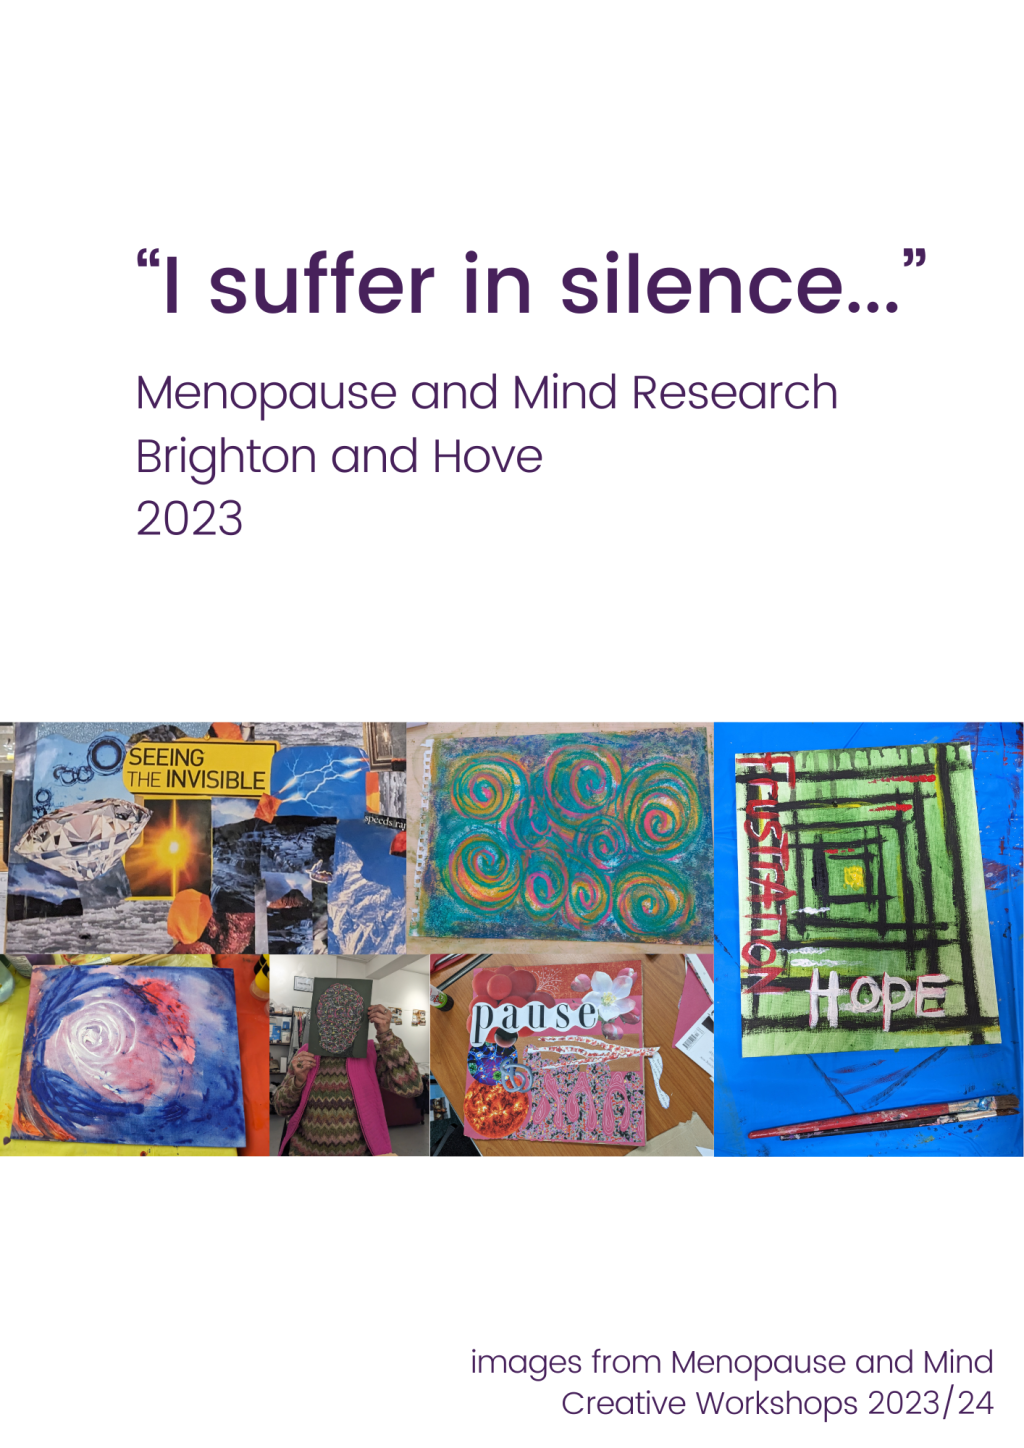 “I suffer in silence…” Menopause and Mind Research – Brighton and Hove 2023